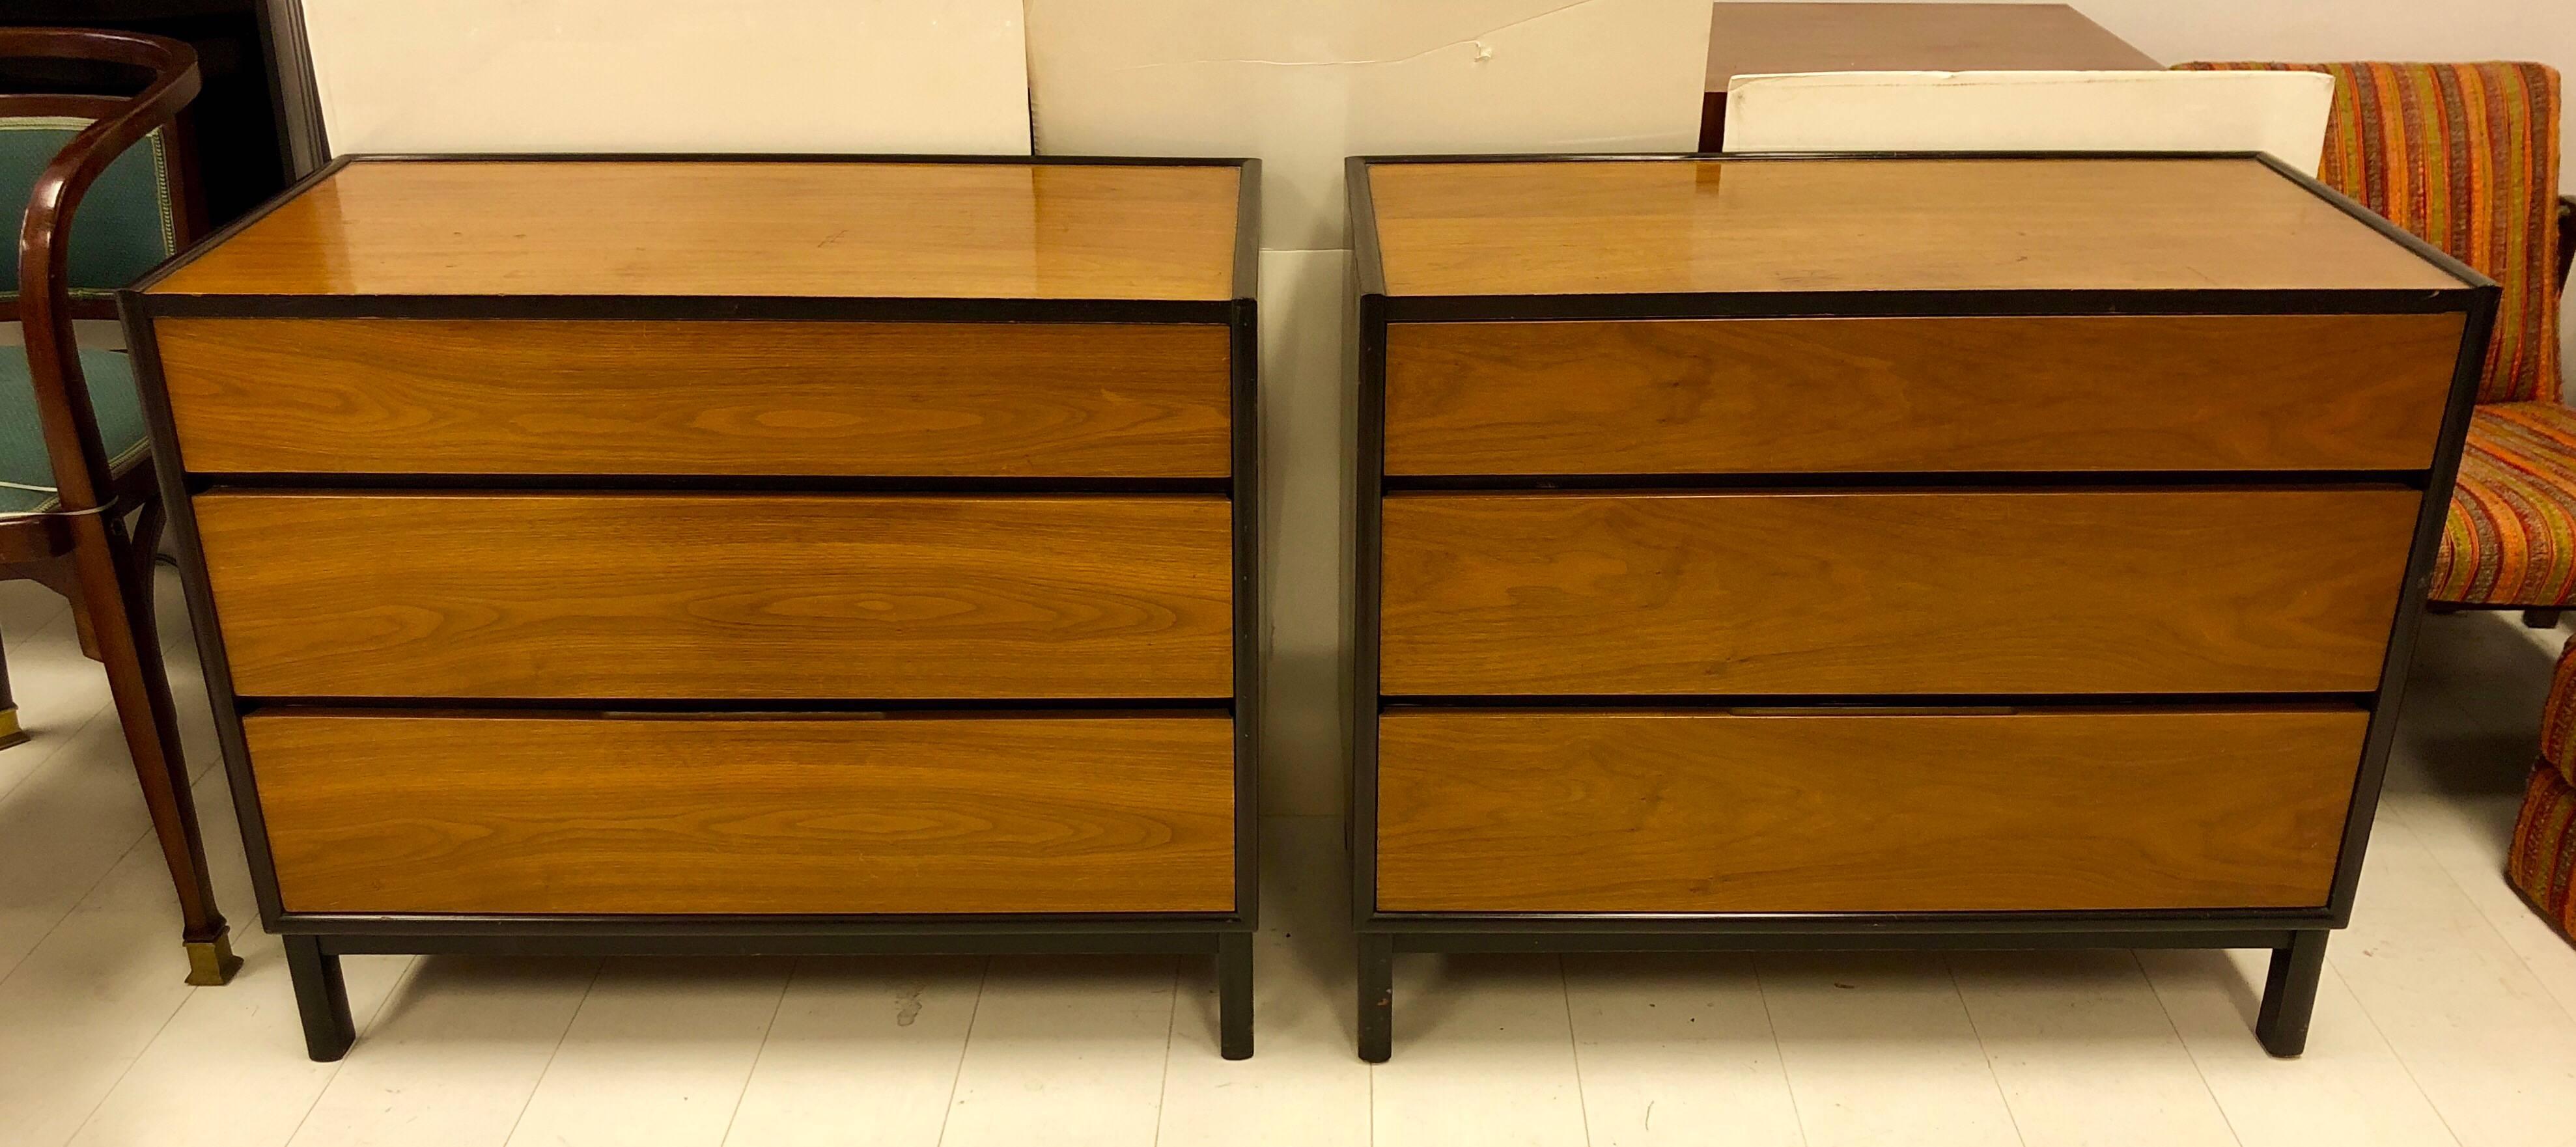 Mid-20th Century Pair of Edward Wormley Designed Commodes for Dunbar